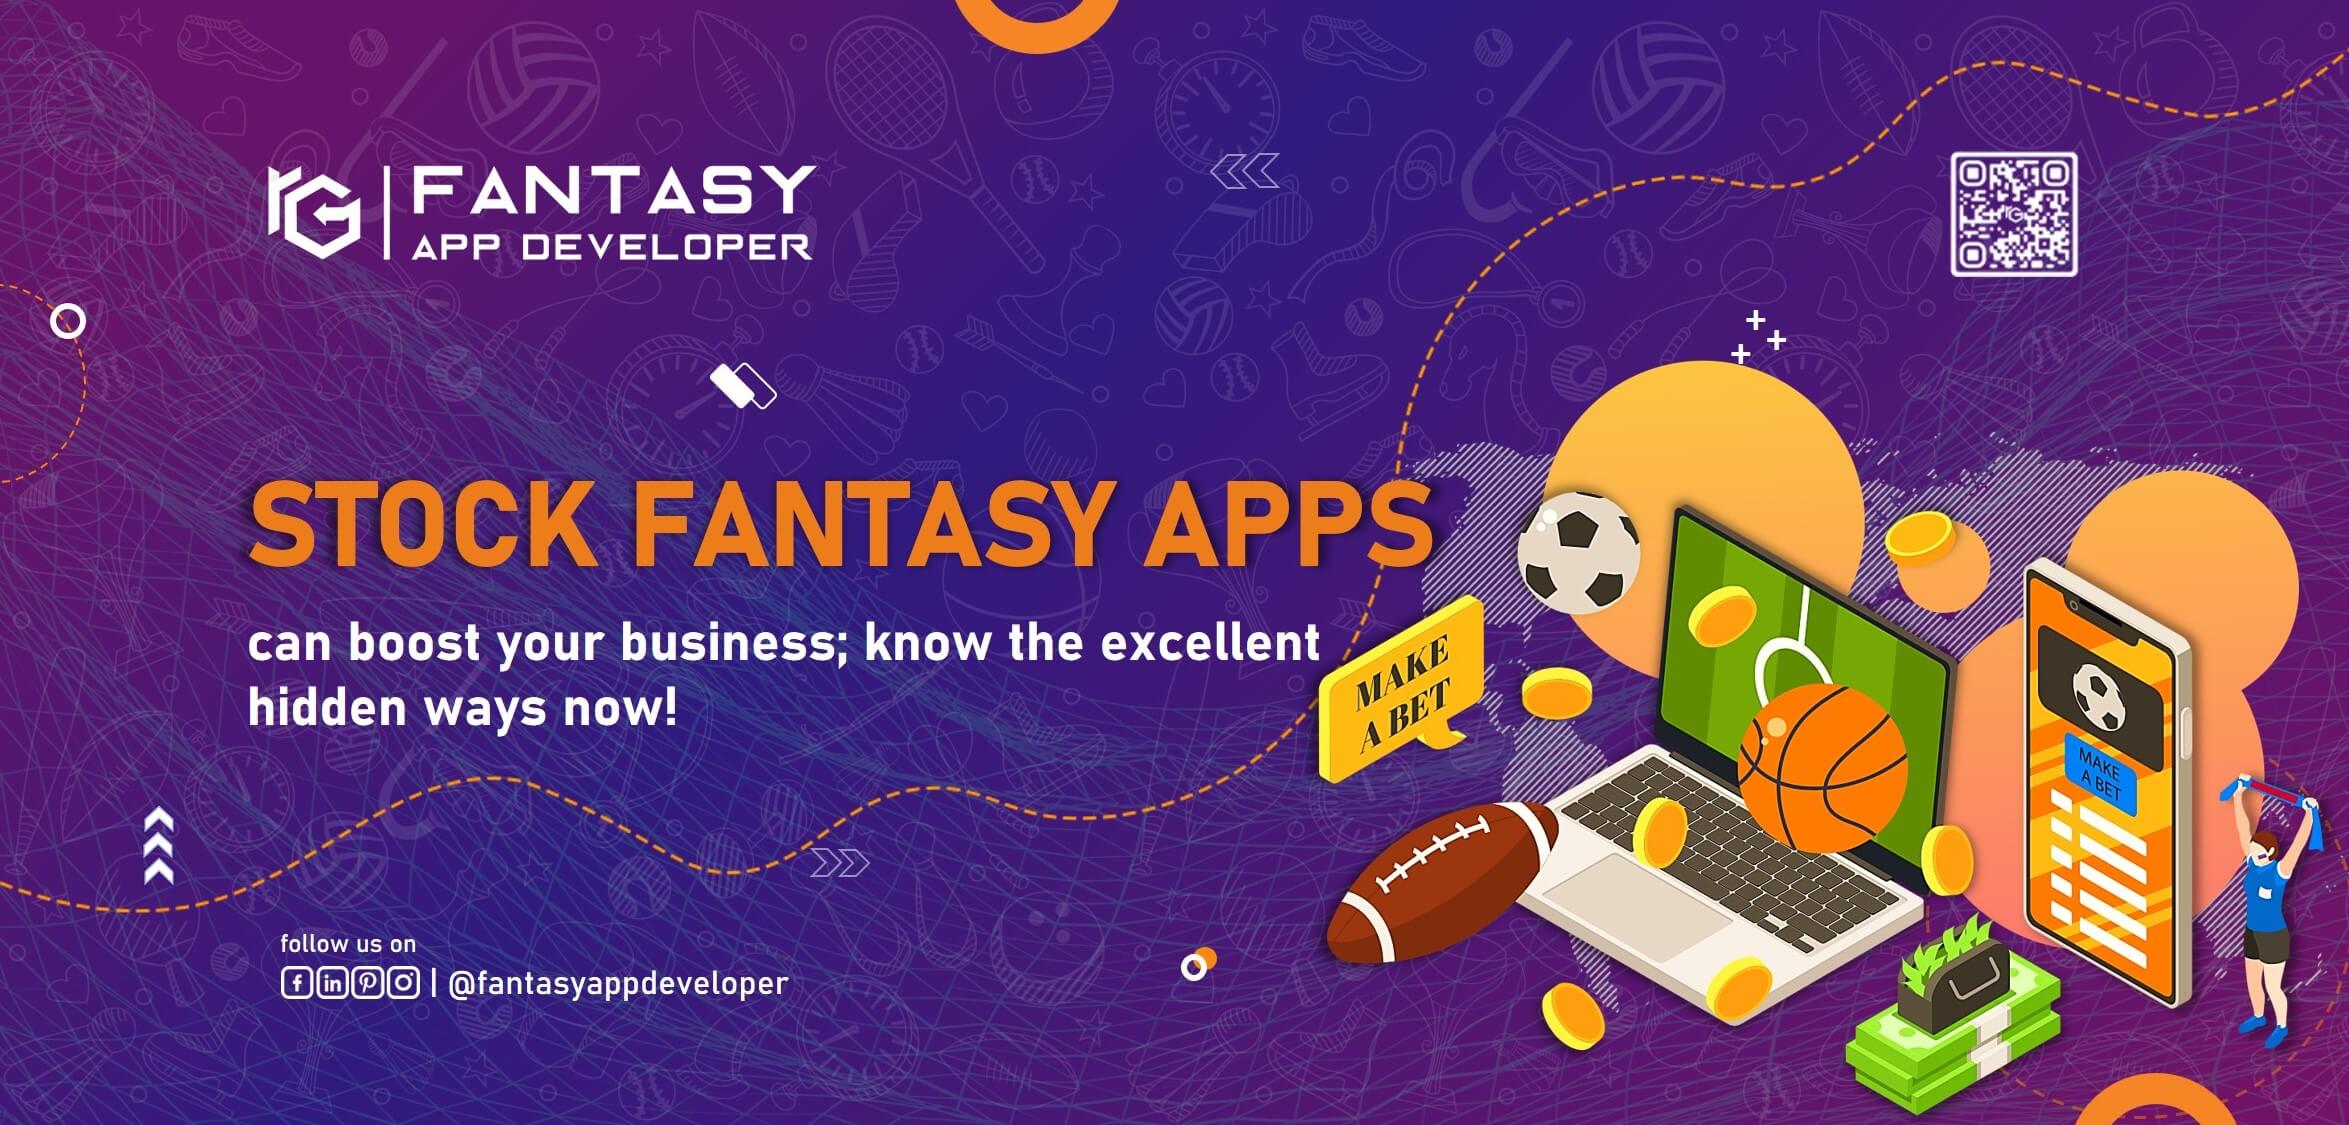 Epic Stock Fantasy Apps can boost your business!